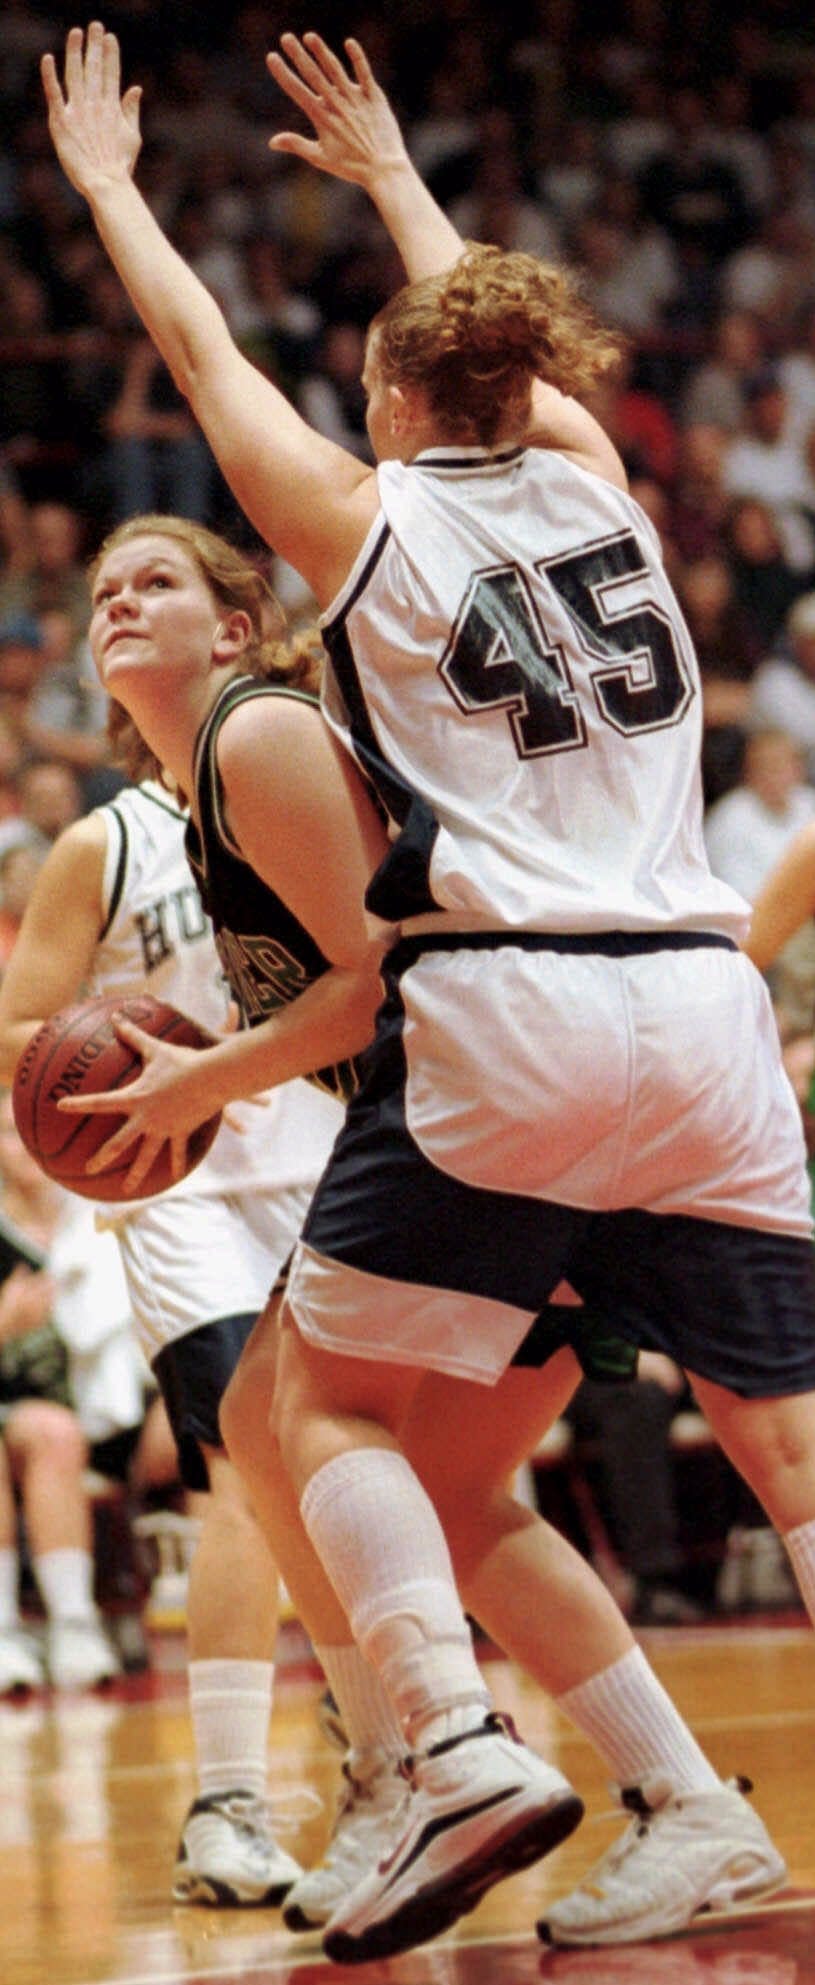 Janesville Parker's Korby Lathrop prepares to shoot against Hudson's Katie Germs (45) during the second half of the Division 1 championship game at the WIAA state tournament in Madison on Saturday, March 11, 2000. Lathrop made the game-winning free throw in Parker's 57-56 victory